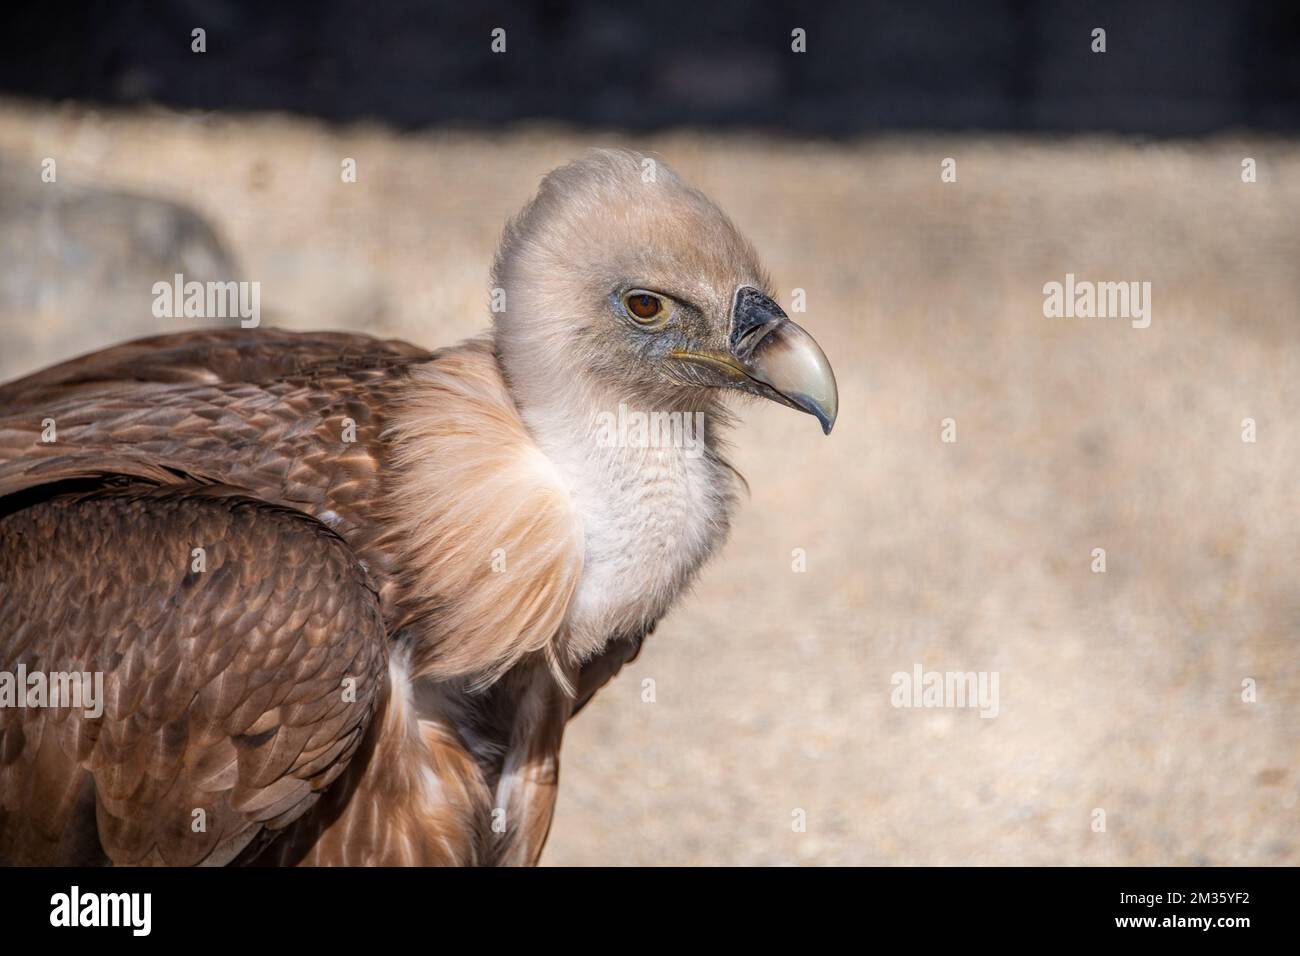 Body part of a vulture with beige and brown feathers Stock Photo